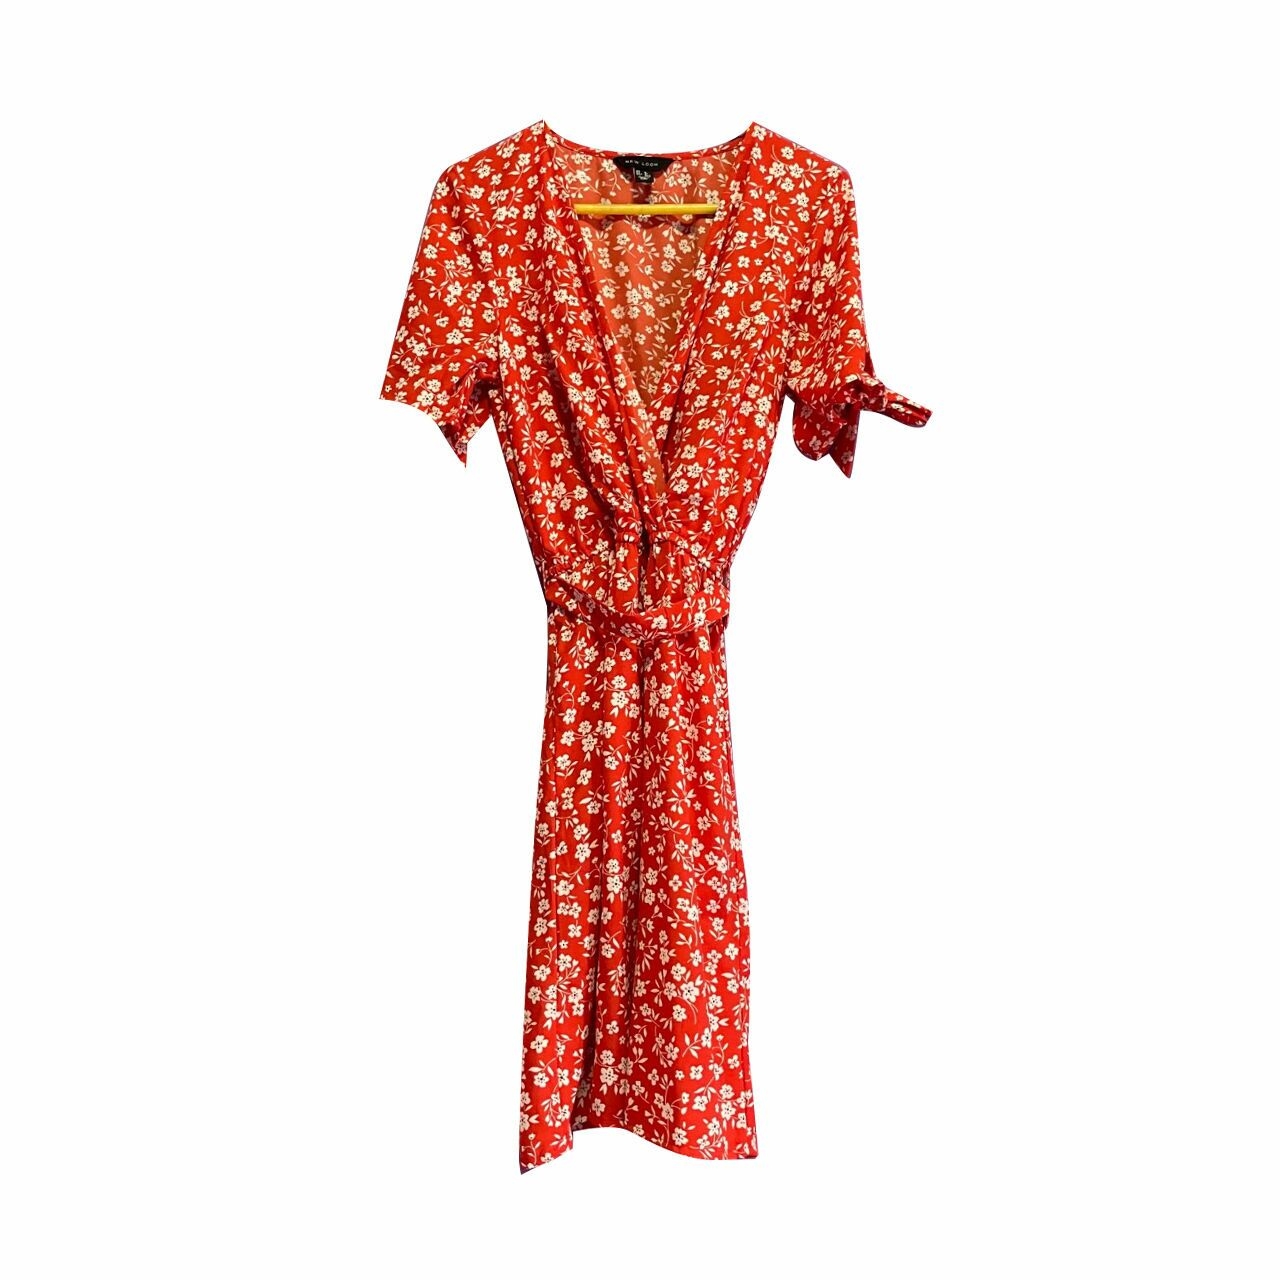 New Look Red Floral Midi Dress